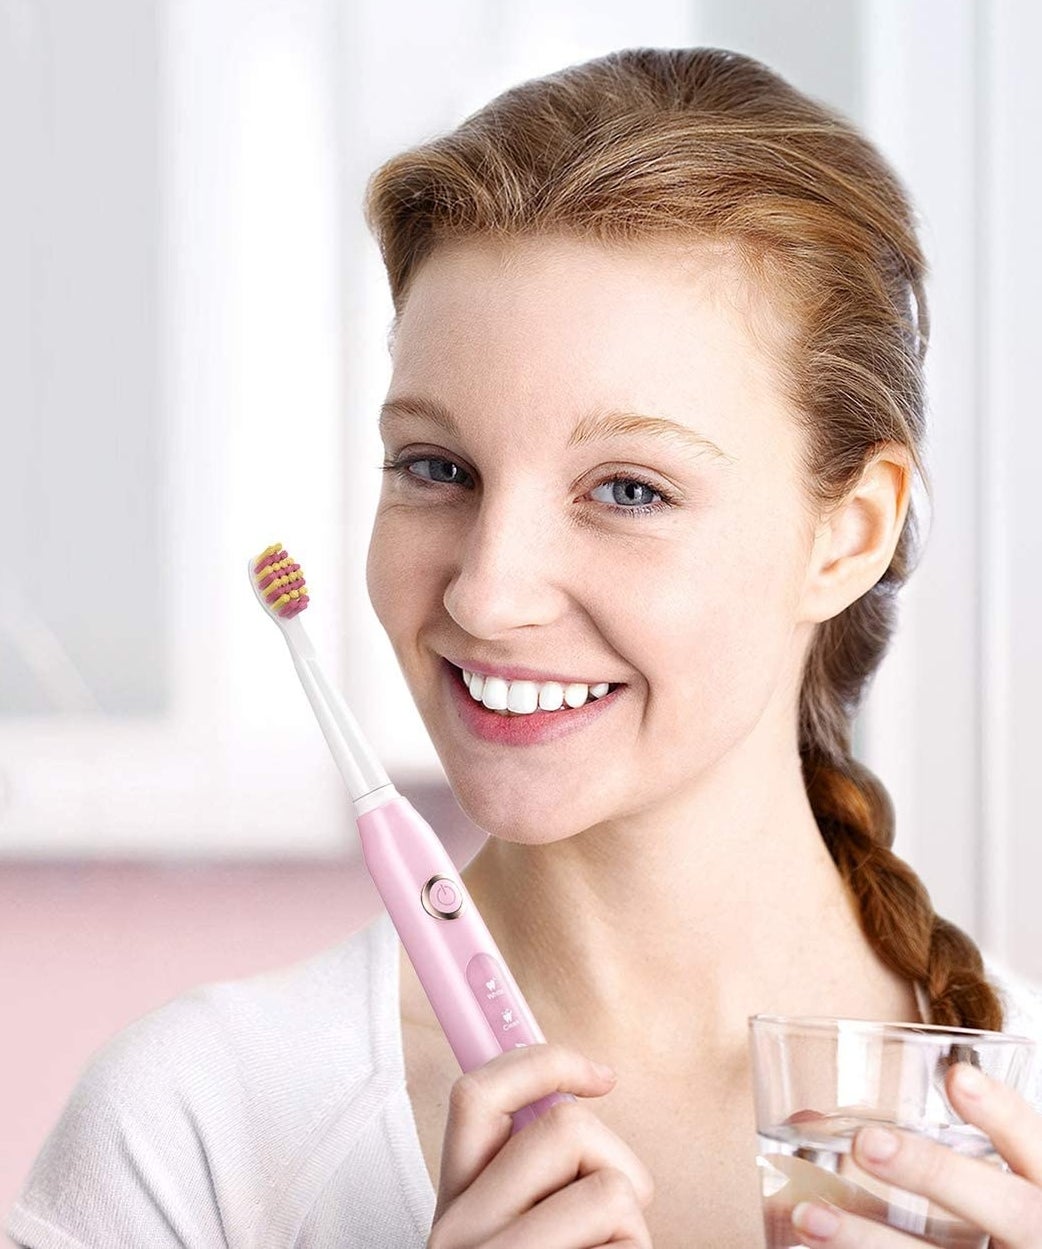 person with the toothbrush and the glass of water